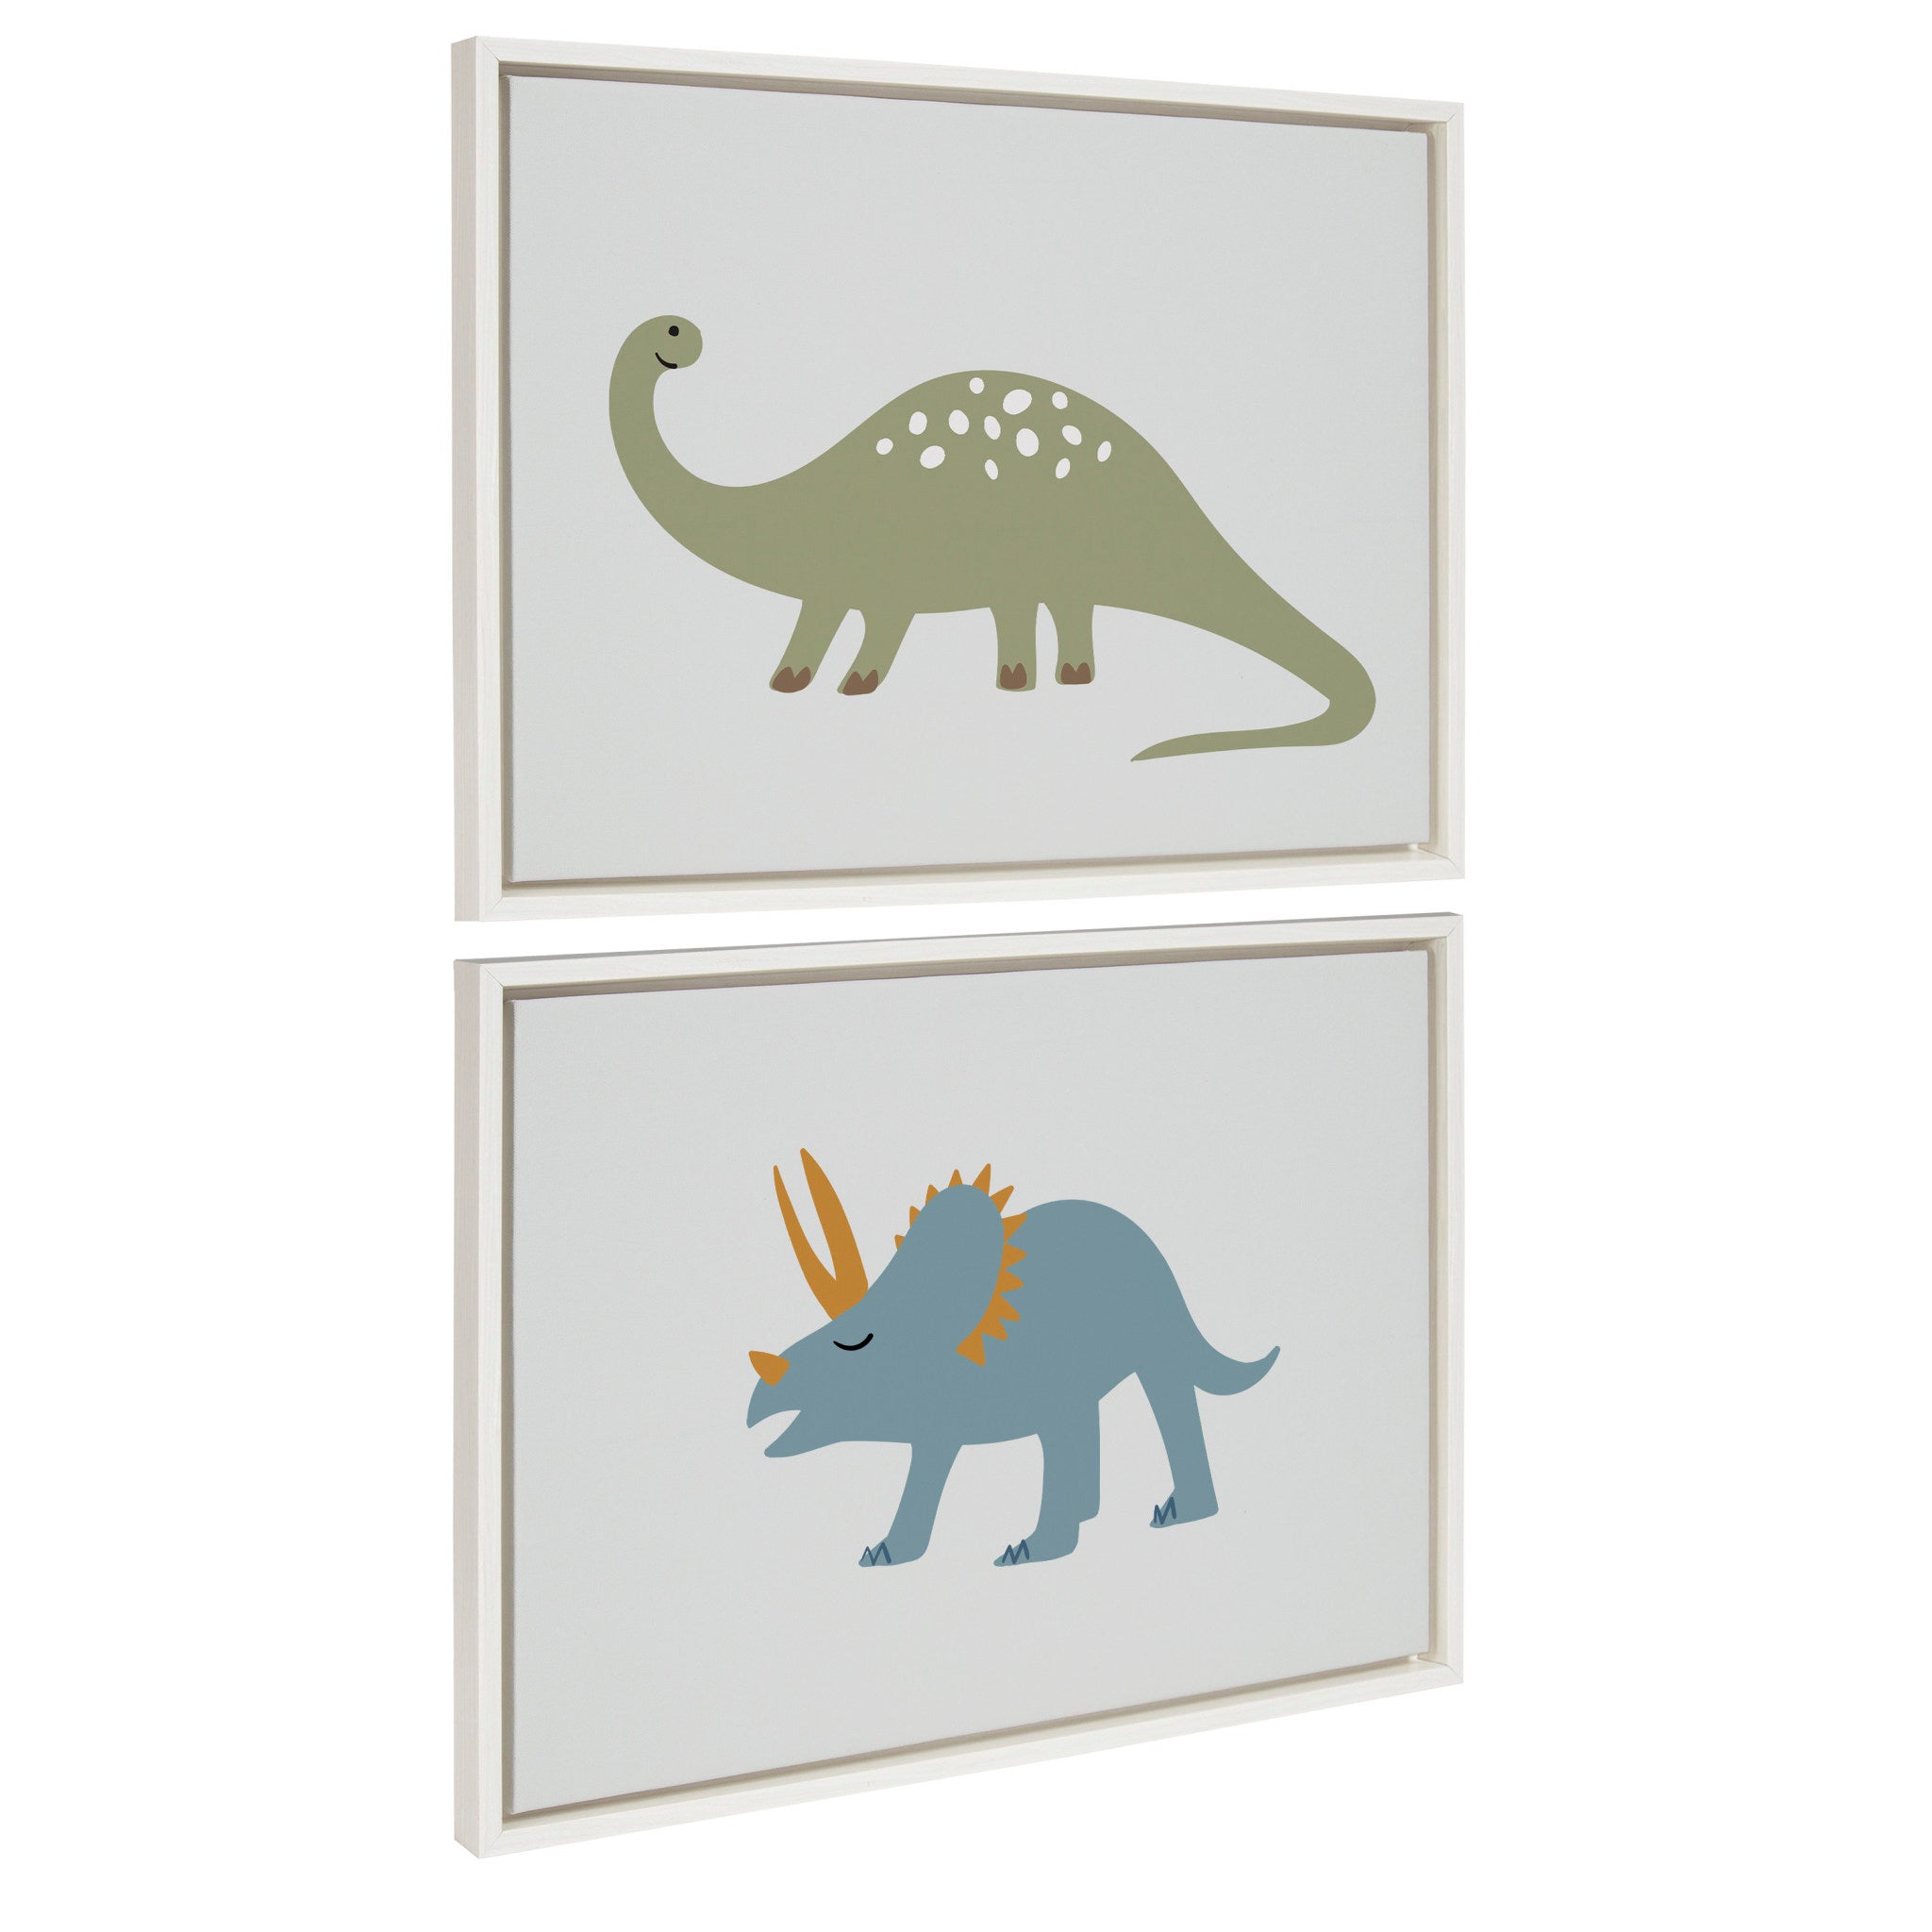 Sylvie 1013 Brontosaurus and 1013 Triceratops Framed Canvas Art Set by Teju Reval of SnazzyHues